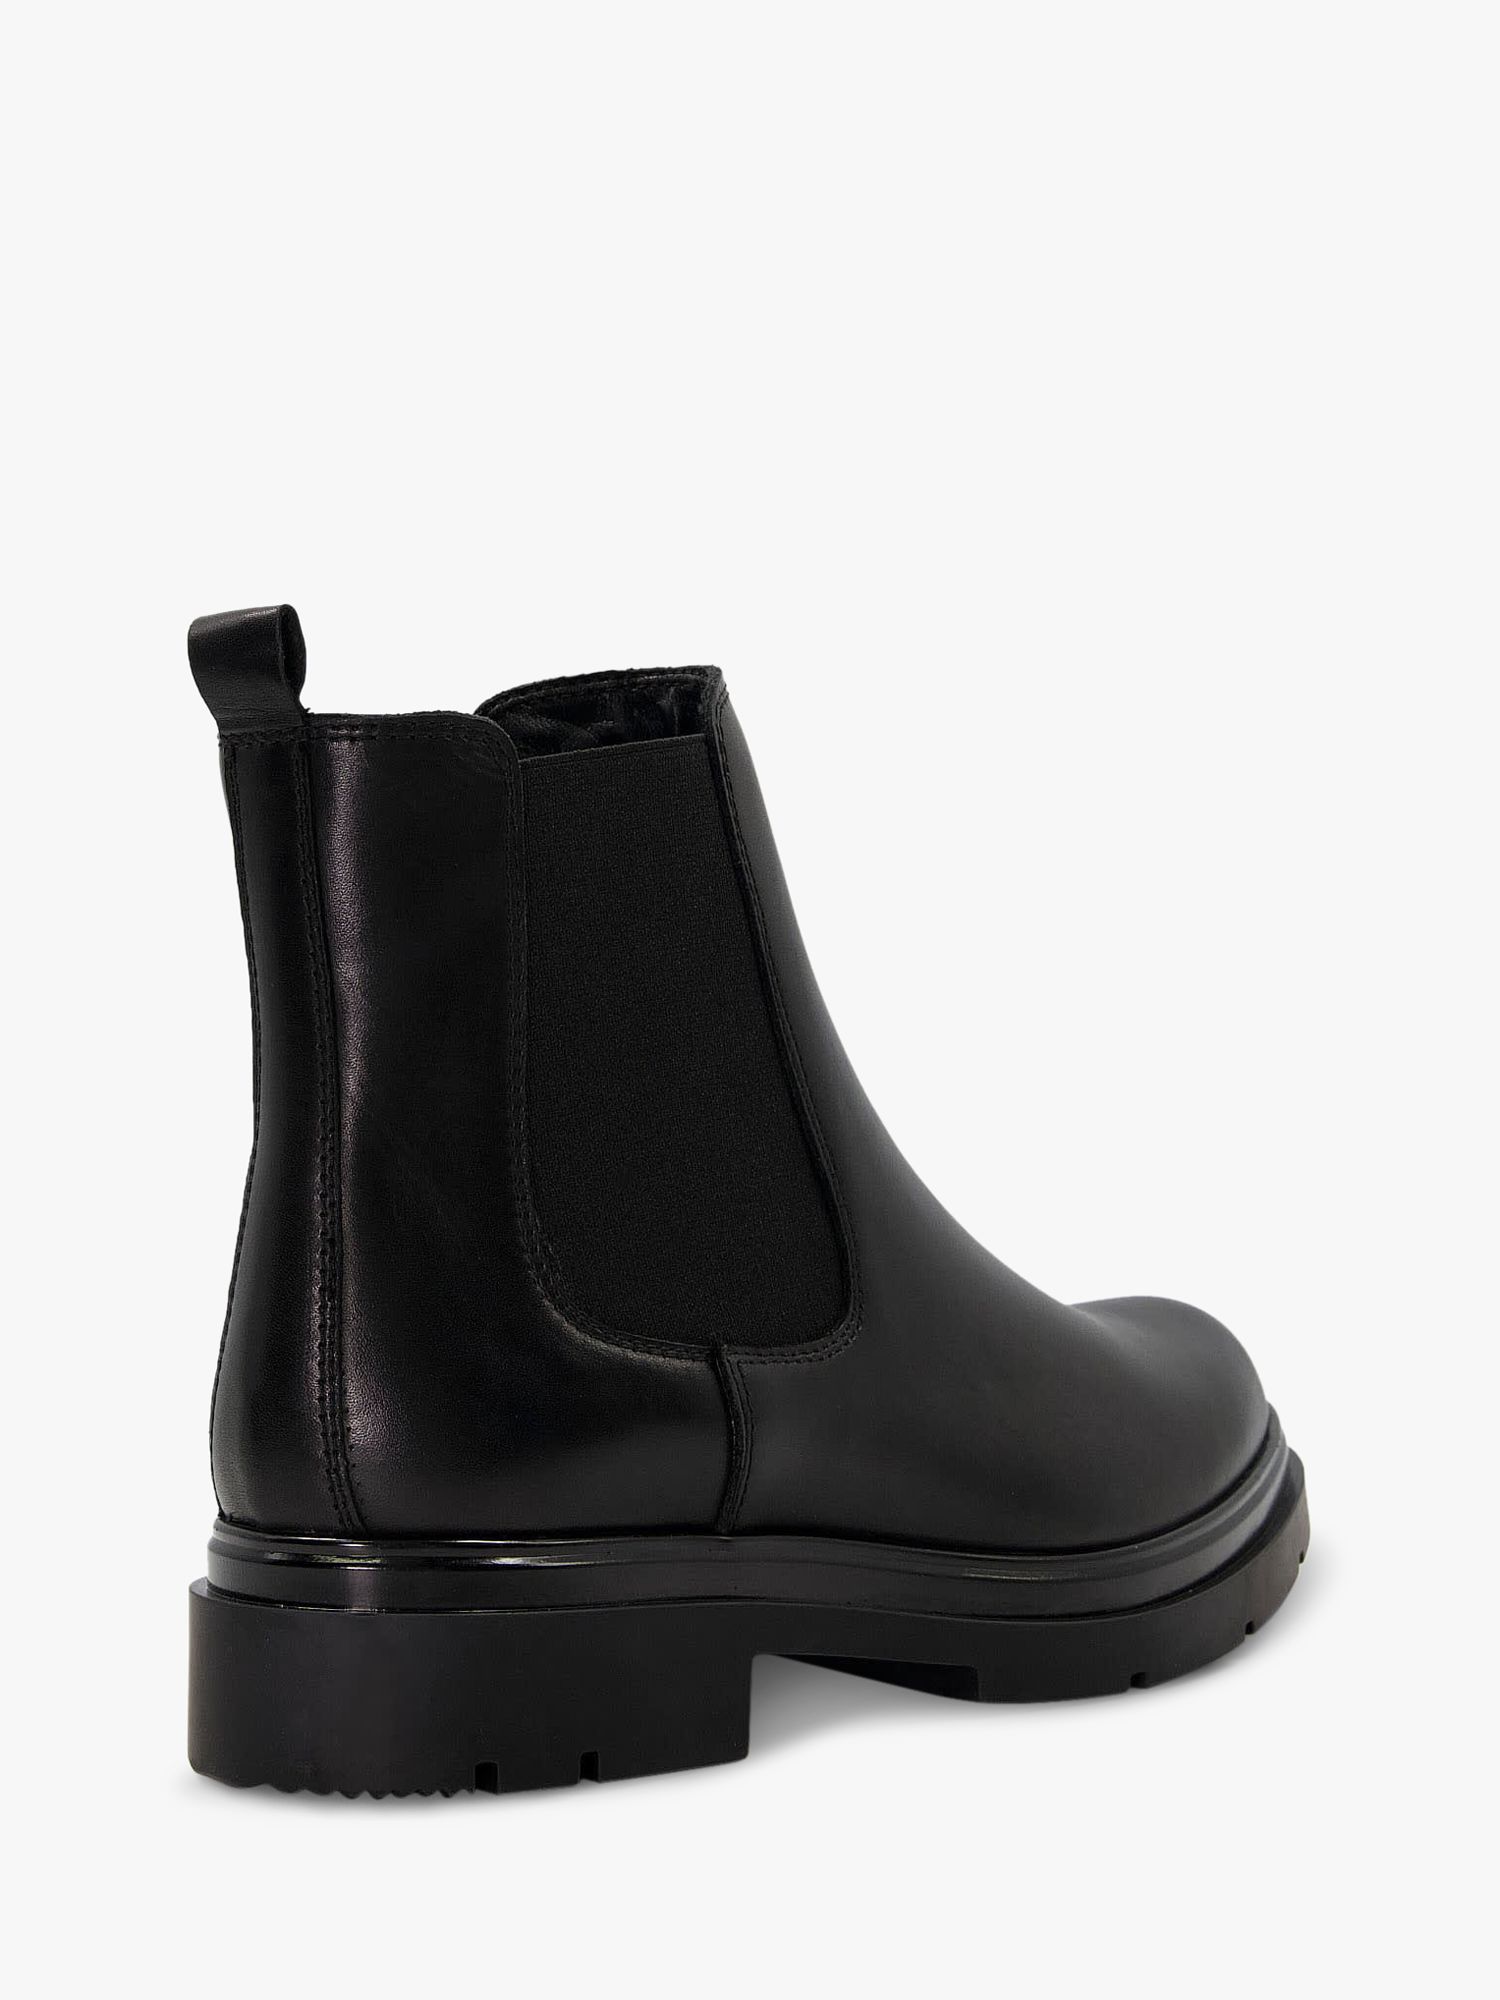 Dune Pinot Chelsea Leather Boots, Black at John Lewis & Partners